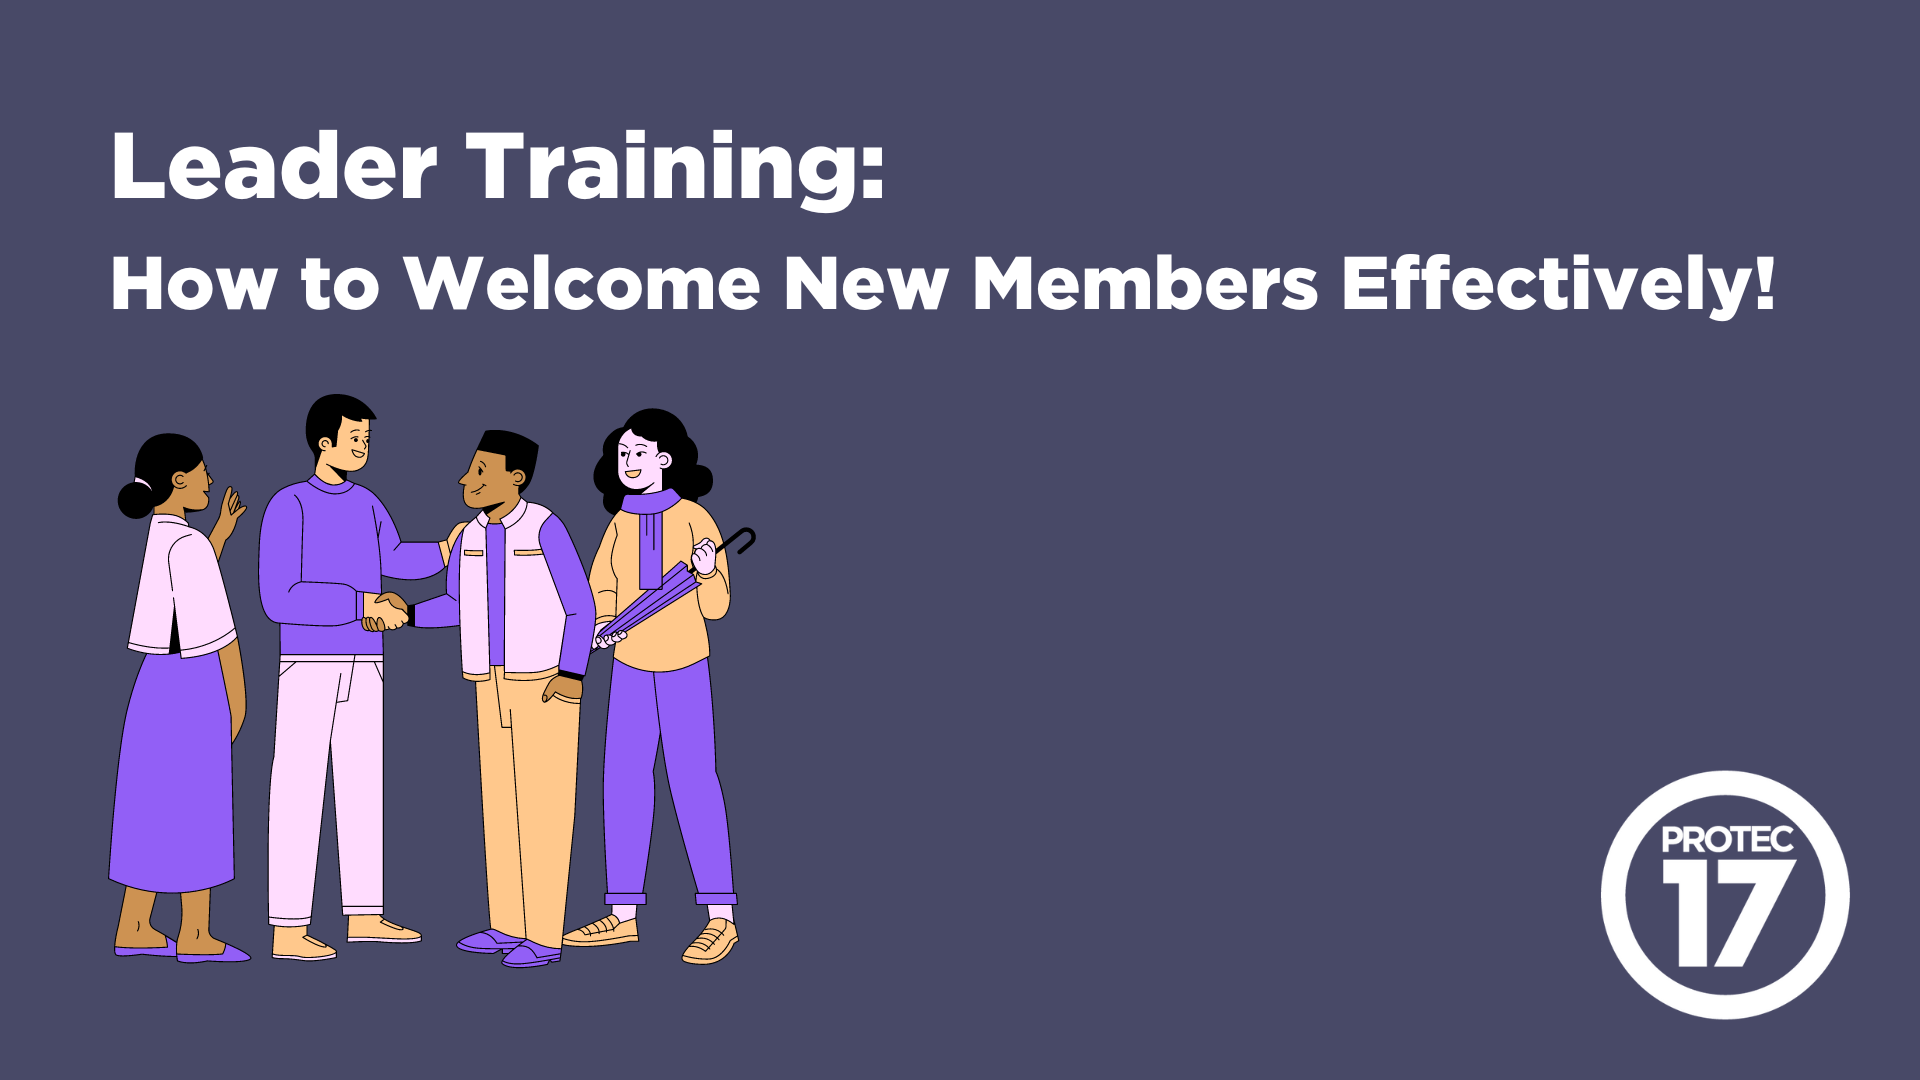 Text reads, "Leader Training: How to Welcome New Members Effectively!" There is a colorful illustration of people welcoming someone. The PROTEC17 logo is in the bottom right.